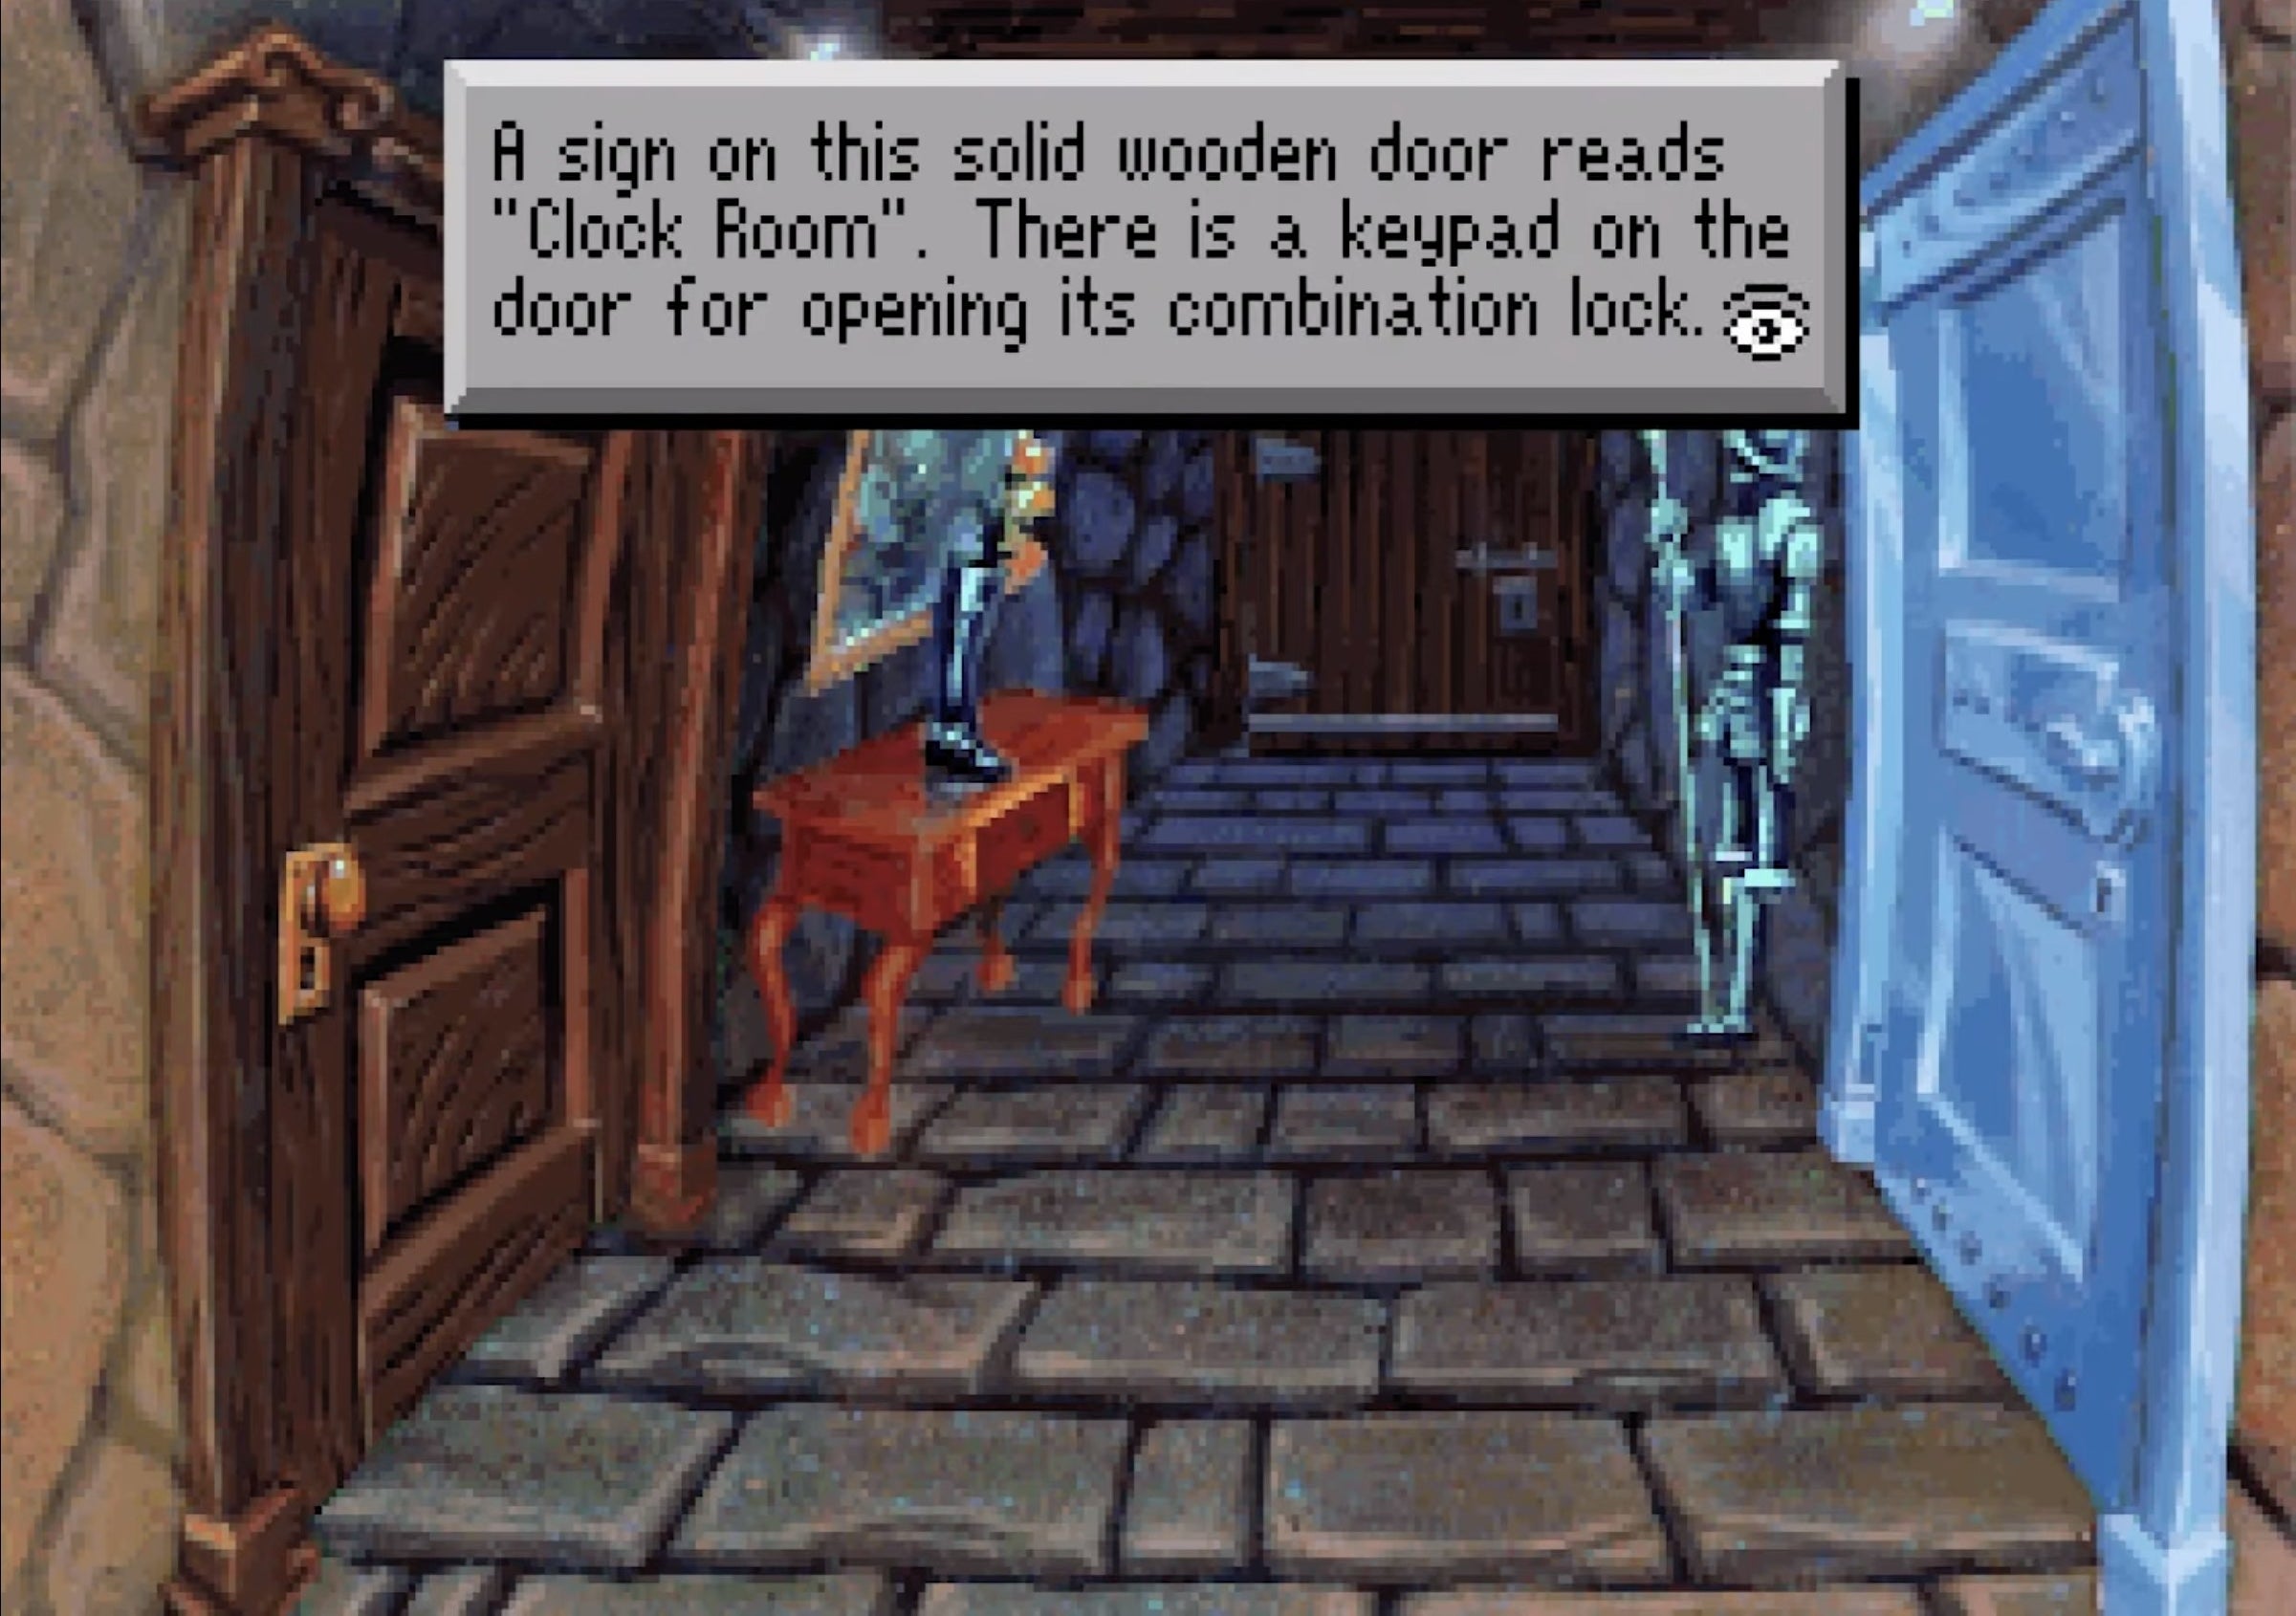 A corridor in a castle, with a sign informing the player about what is around them, such as a door with a combination lock